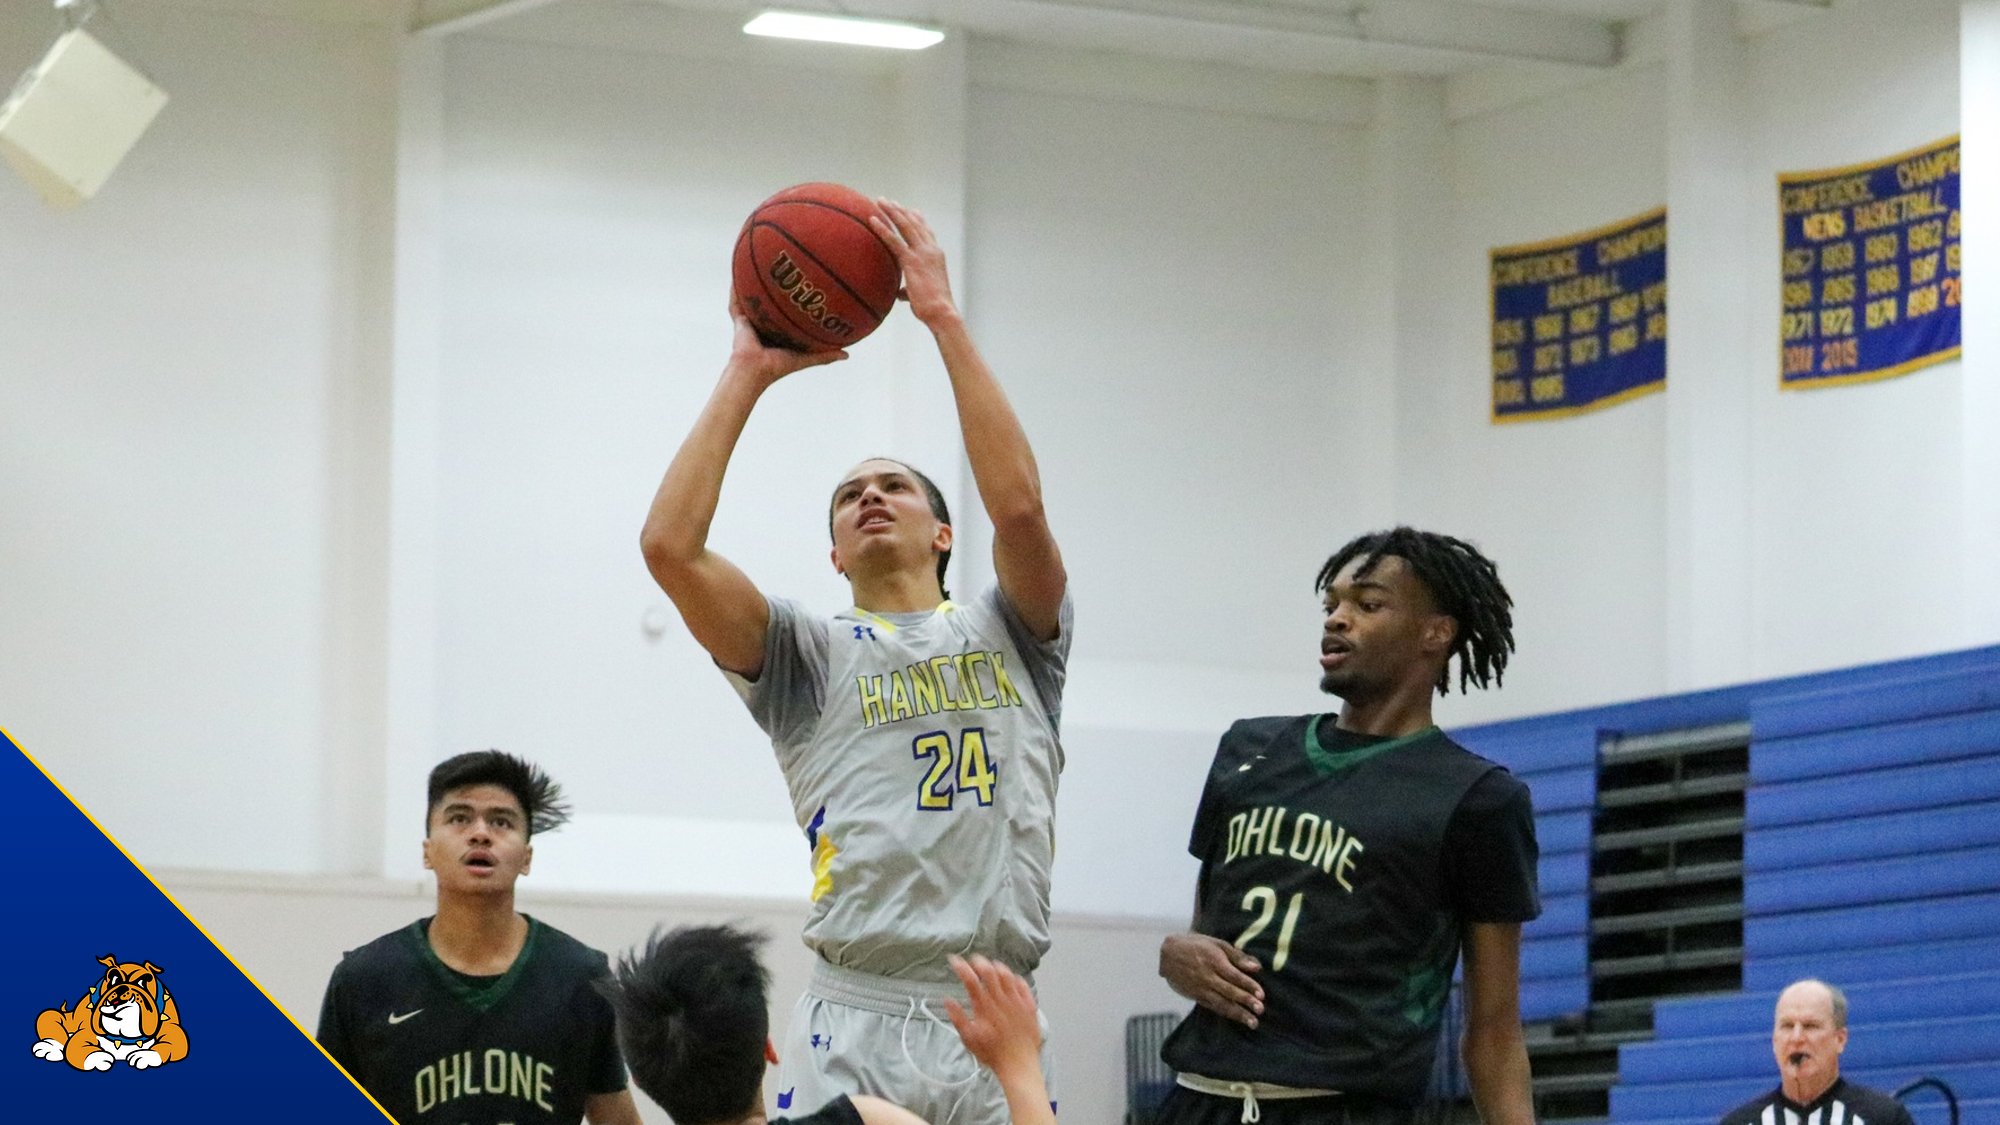 Men's Basketball Secures Fifth Straight Win at Cuesta